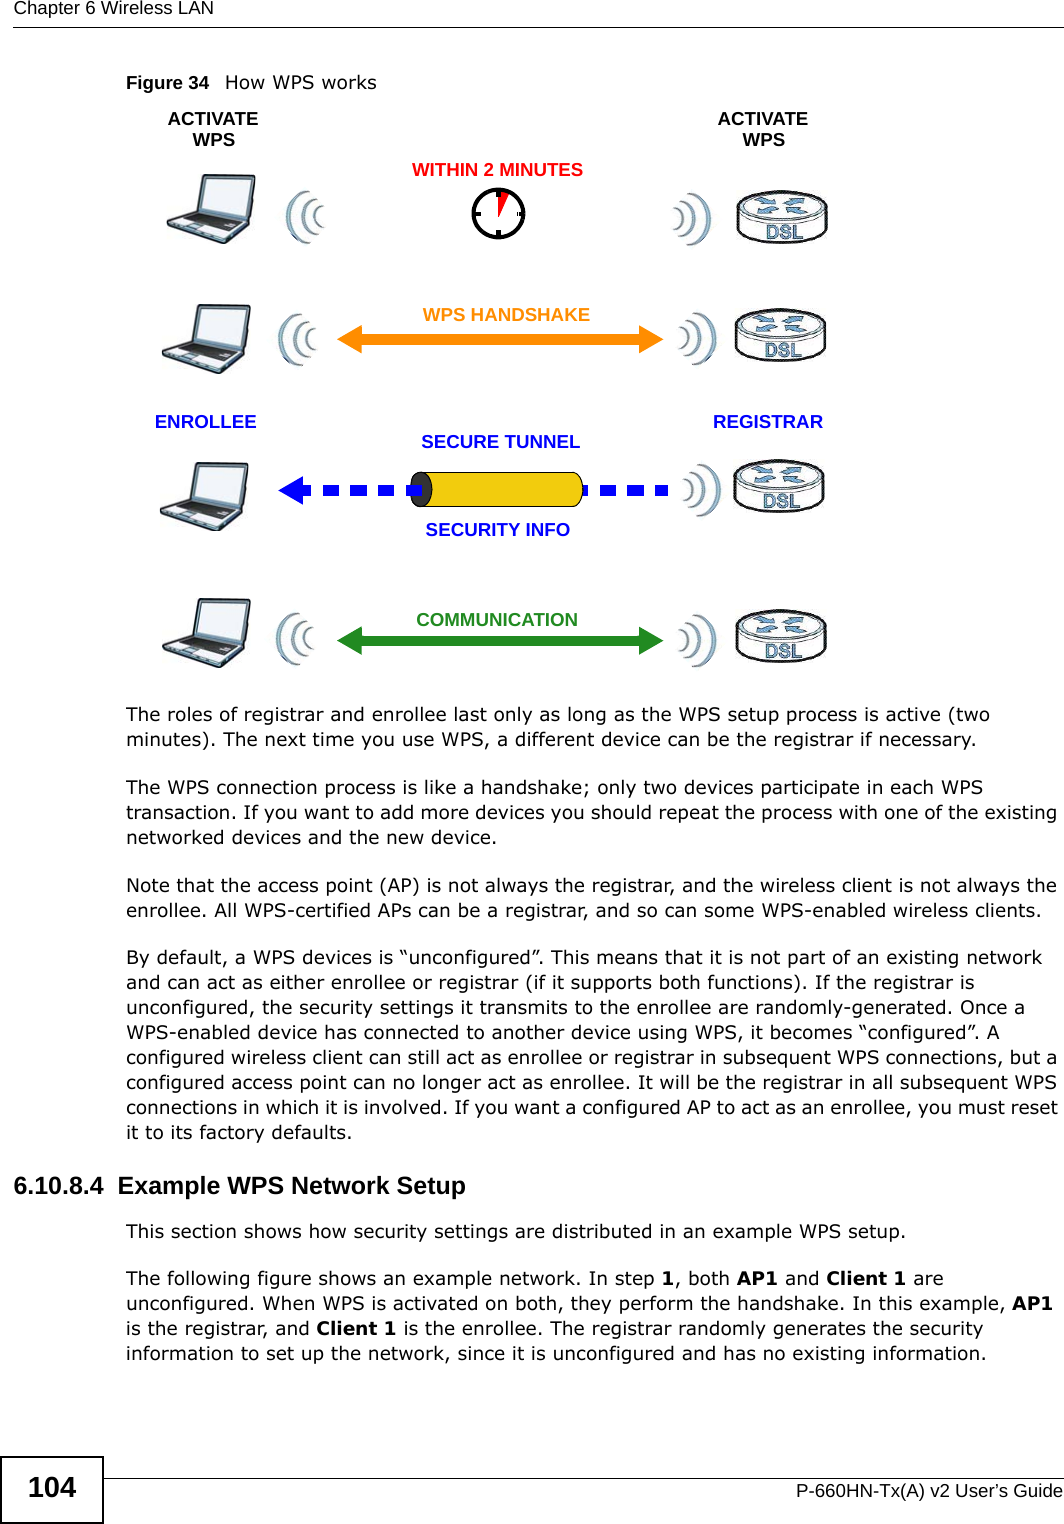 Chapter 6 Wireless LANP-660HN-Tx(A) v2 User’s Guide104Figure 34   How WPS worksThe roles of registrar and enrollee last only as long as the WPS setup process is active (two minutes). The next time you use WPS, a different device can be the registrar if necessary.The WPS connection process is like a handshake; only two devices participate in each WPS transaction. If you want to add more devices you should repeat the process with one of the existing networked devices and the new device.Note that the access point (AP) is not always the registrar, and the wireless client is not always the enrollee. All WPS-certified APs can be a registrar, and so can some WPS-enabled wireless clients.By default, a WPS devices is “unconfigured”. This means that it is not part of an existing network and can act as either enrollee or registrar (if it supports both functions). If the registrar is unconfigured, the security settings it transmits to the enrollee are randomly-generated. Once a WPS-enabled device has connected to another device using WPS, it becomes “configured”. A configured wireless client can still act as enrollee or registrar in subsequent WPS connections, but a configured access point can no longer act as enrollee. It will be the registrar in all subsequent WPS connections in which it is involved. If you want a configured AP to act as an enrollee, you must reset it to its factory defaults.6.10.8.4  Example WPS Network SetupThis section shows how security settings are distributed in an example WPS setup.The following figure shows an example network. In step 1, both AP1 and Client 1 are unconfigured. When WPS is activated on both, they perform the handshake. In this example, AP1 is the registrar, and Client 1 is the enrollee. The registrar randomly generates the security information to set up the network, since it is unconfigured and has no existing information.SECURE TUNNELSECURITY INFOWITHIN 2 MINUTESCOMMUNICATIONACTIVATEWPSACTIVATEWPSWPS HANDSHAKEREGISTRARENROLLEE